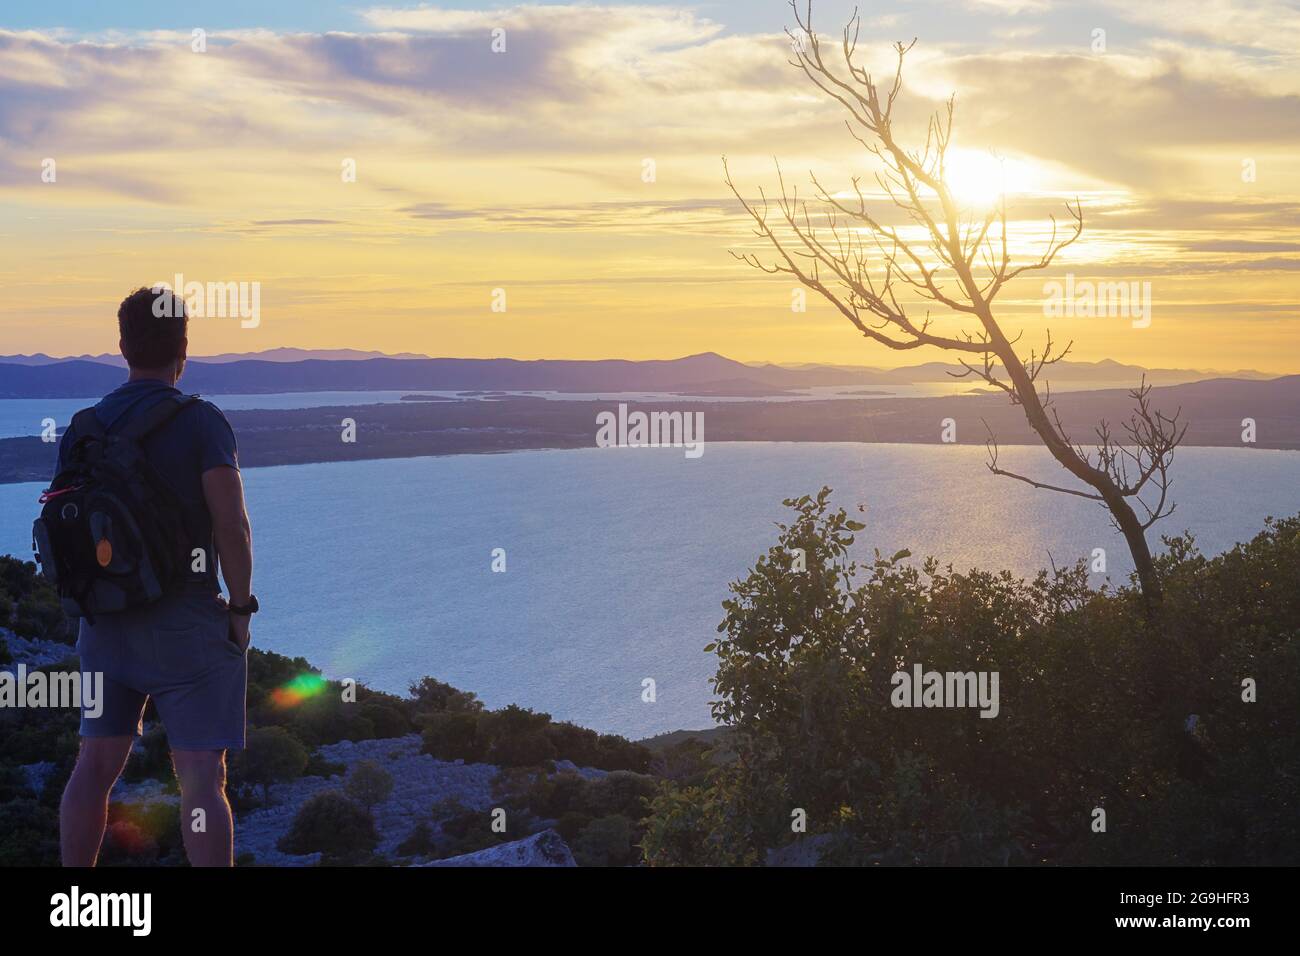 Male hiker on top of the hill watching a beautiful sunset over Adriatic sea. Hiking, achievement, expectation, optimism and self-reflection concepts. Stock Photo